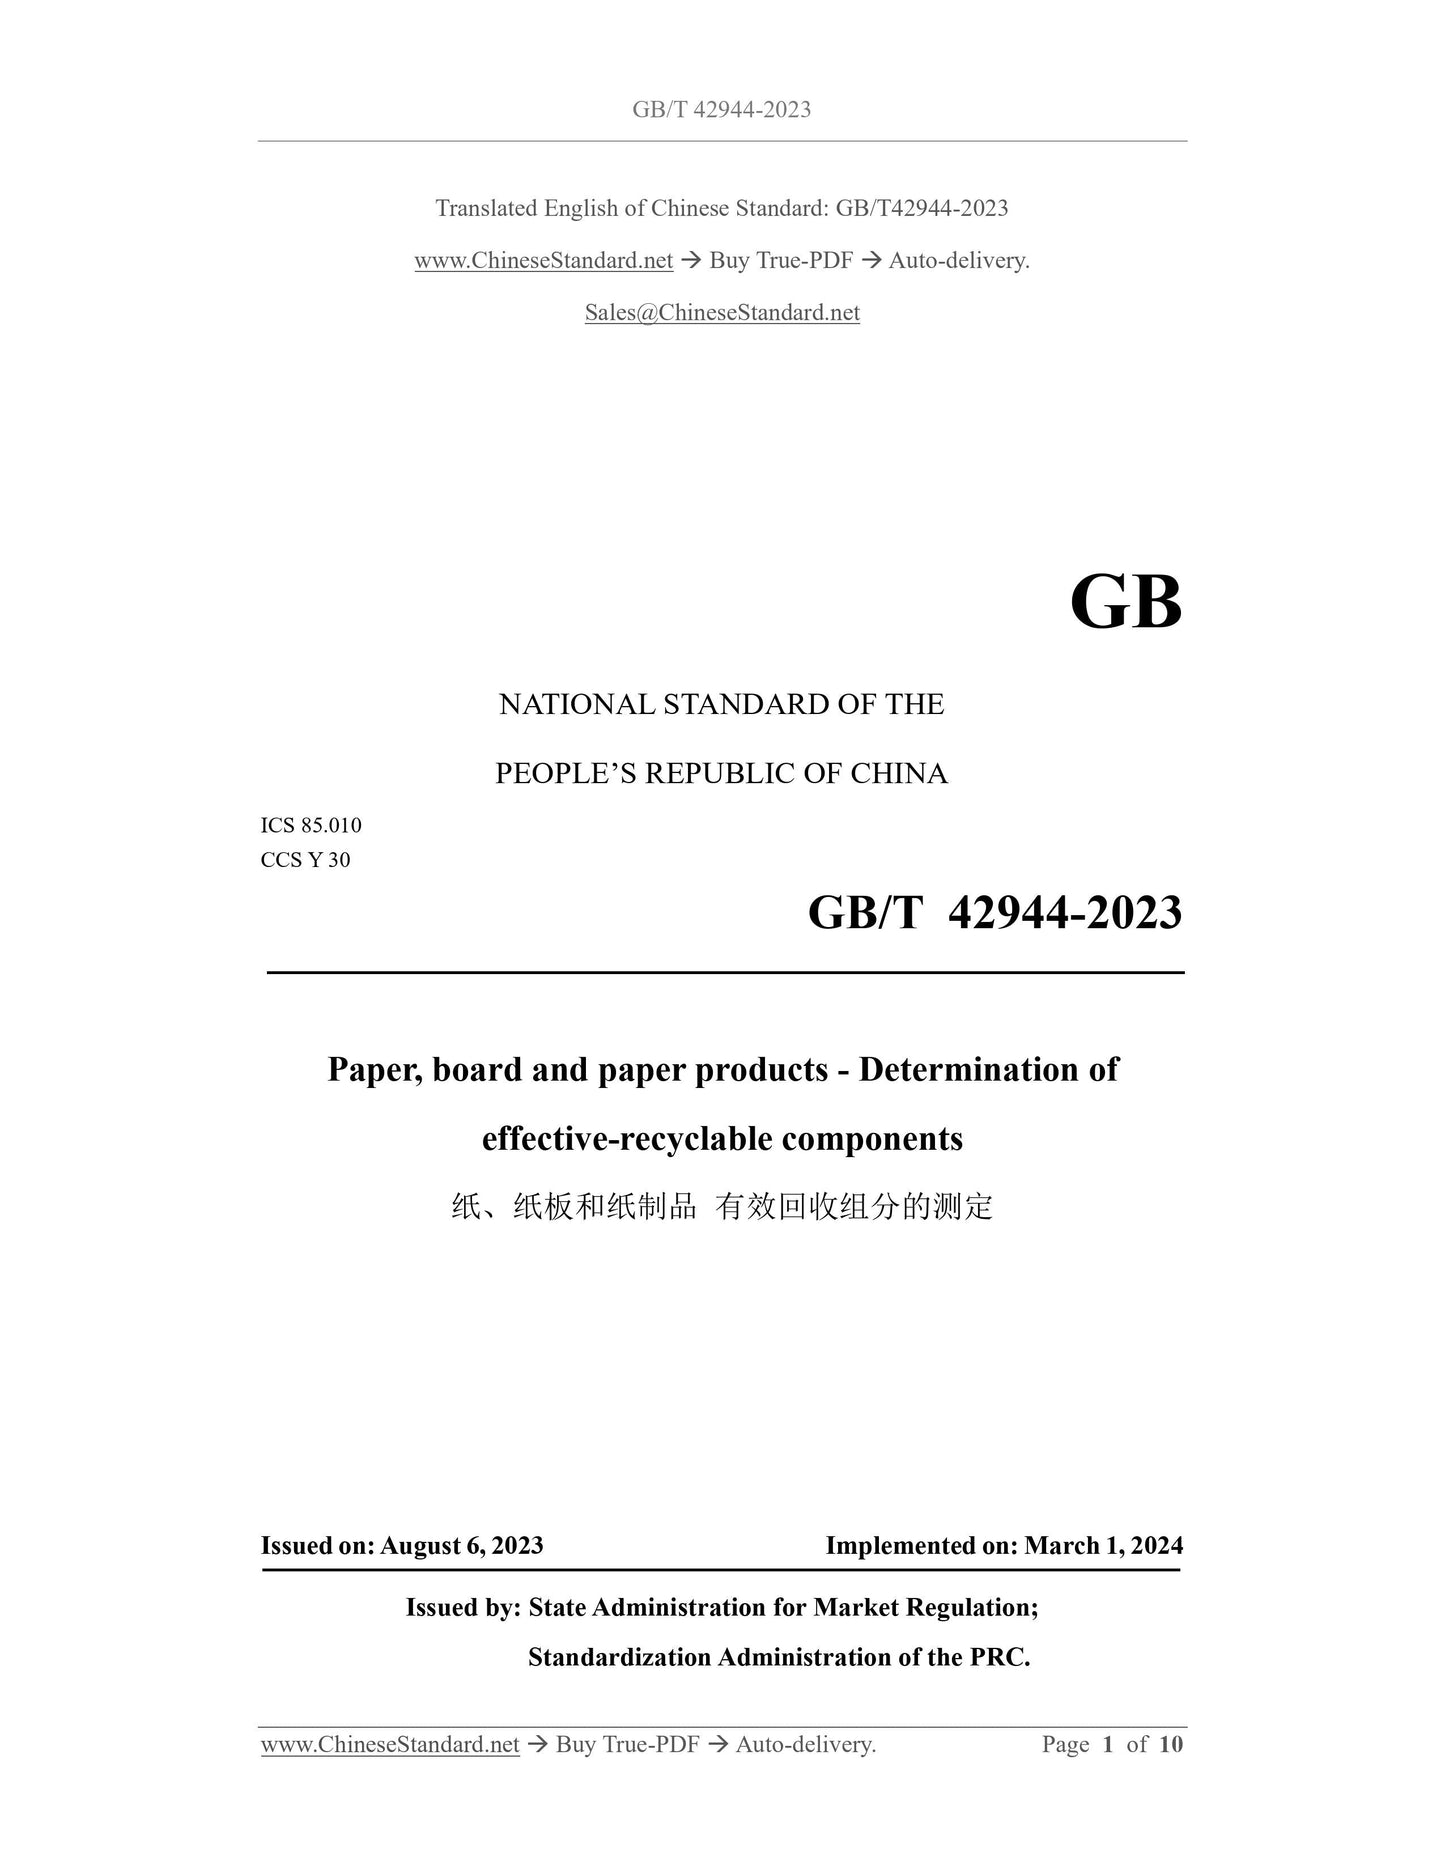 GB/T 42944-2023 Page 1